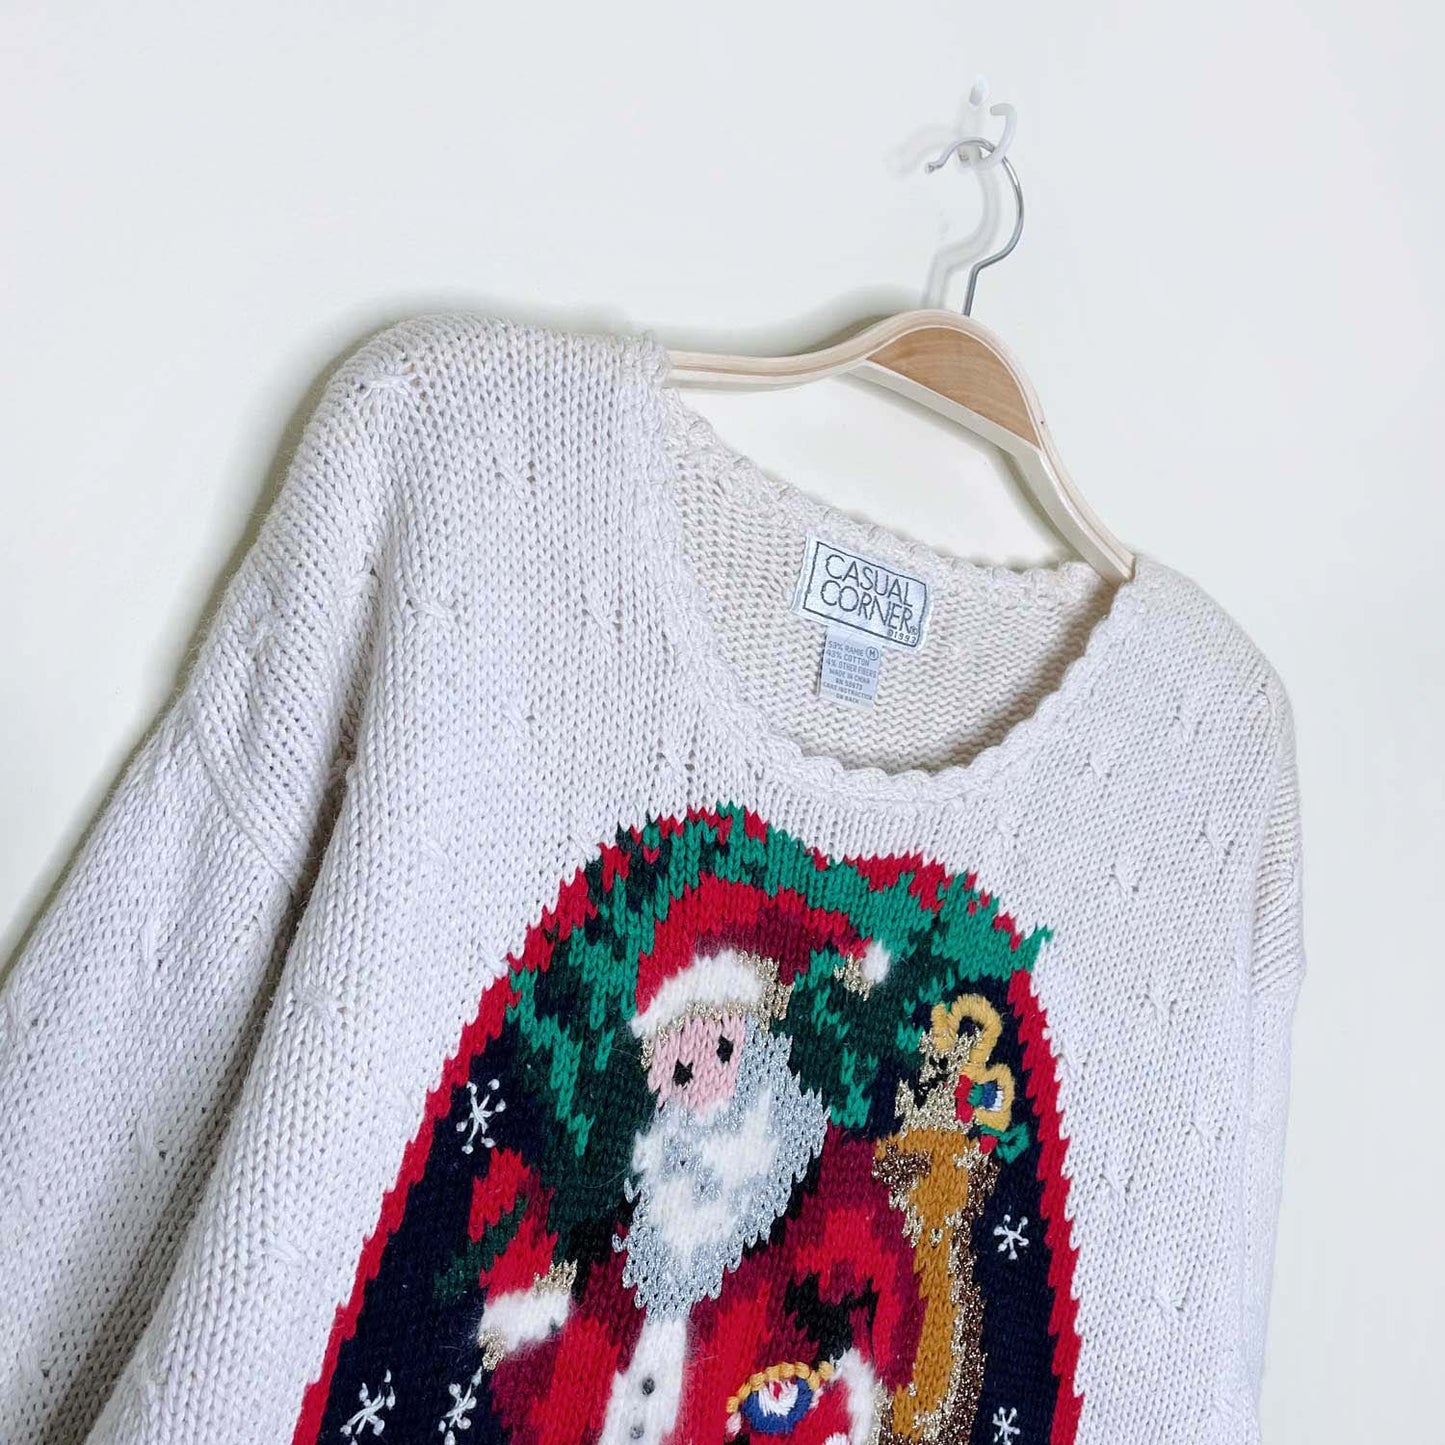 vintage 90s casual corner santa claus holly knitted sweater - size medium